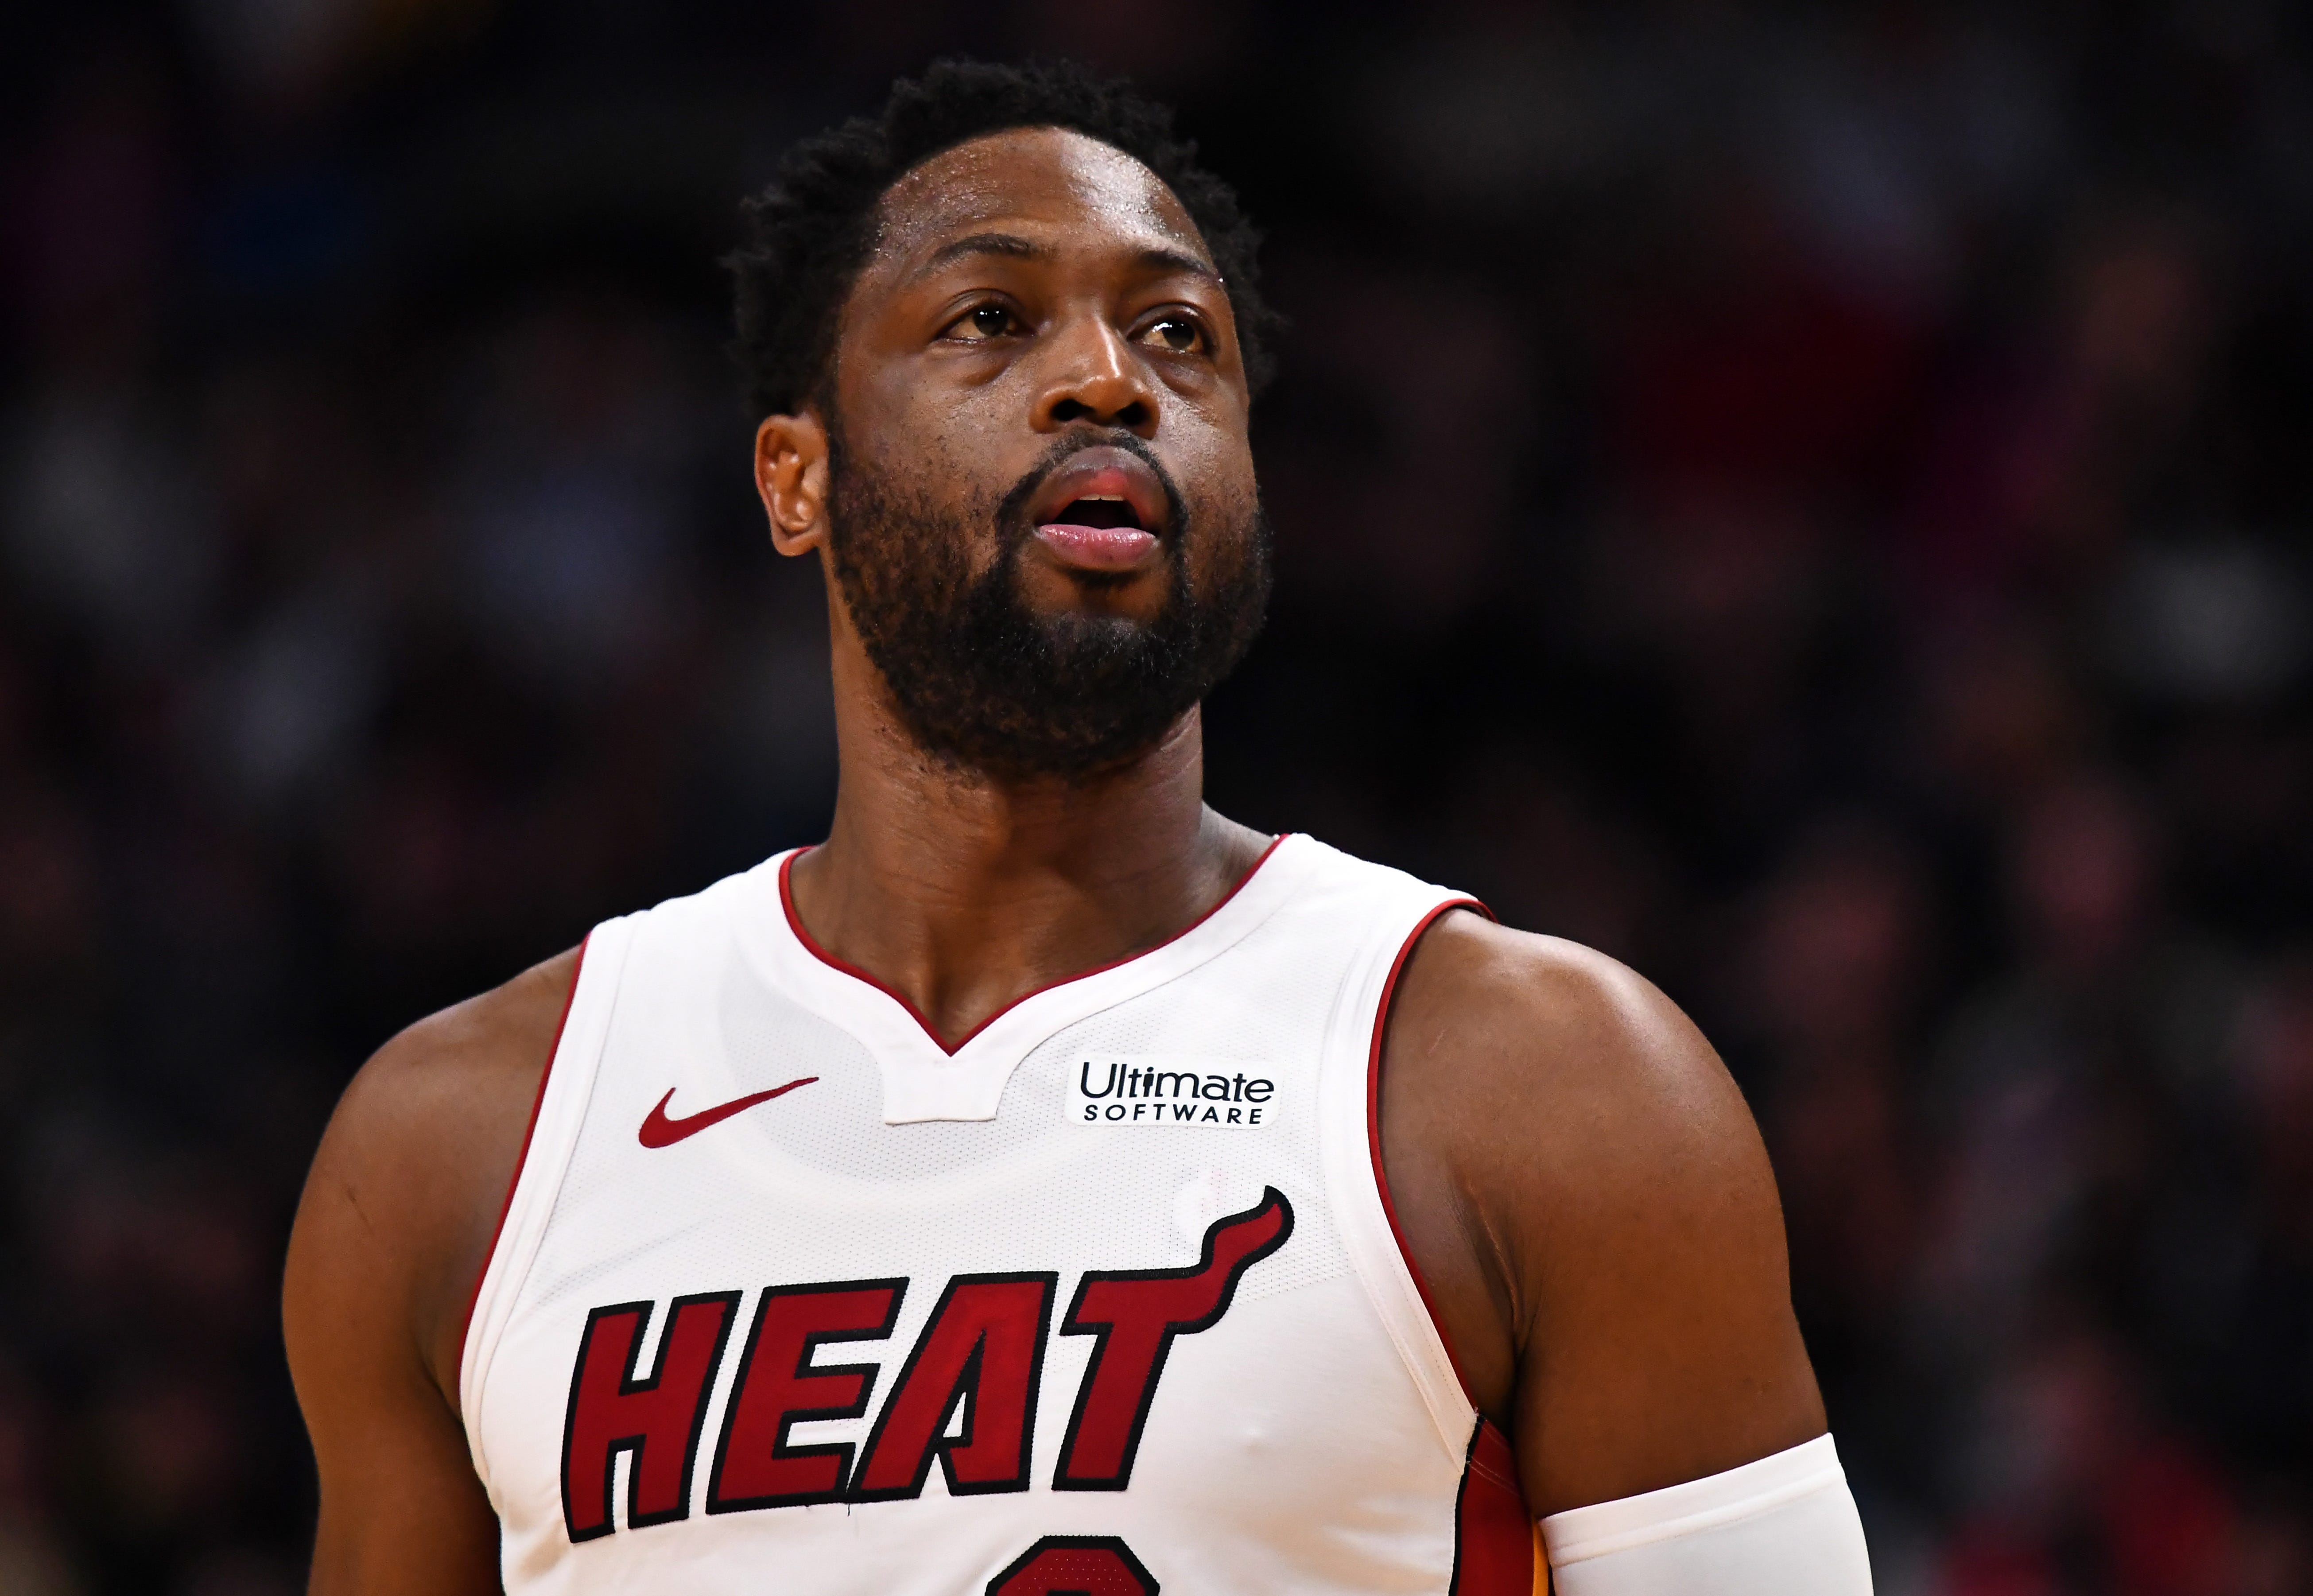 Dwyane Wade will see his No. 3 retired 